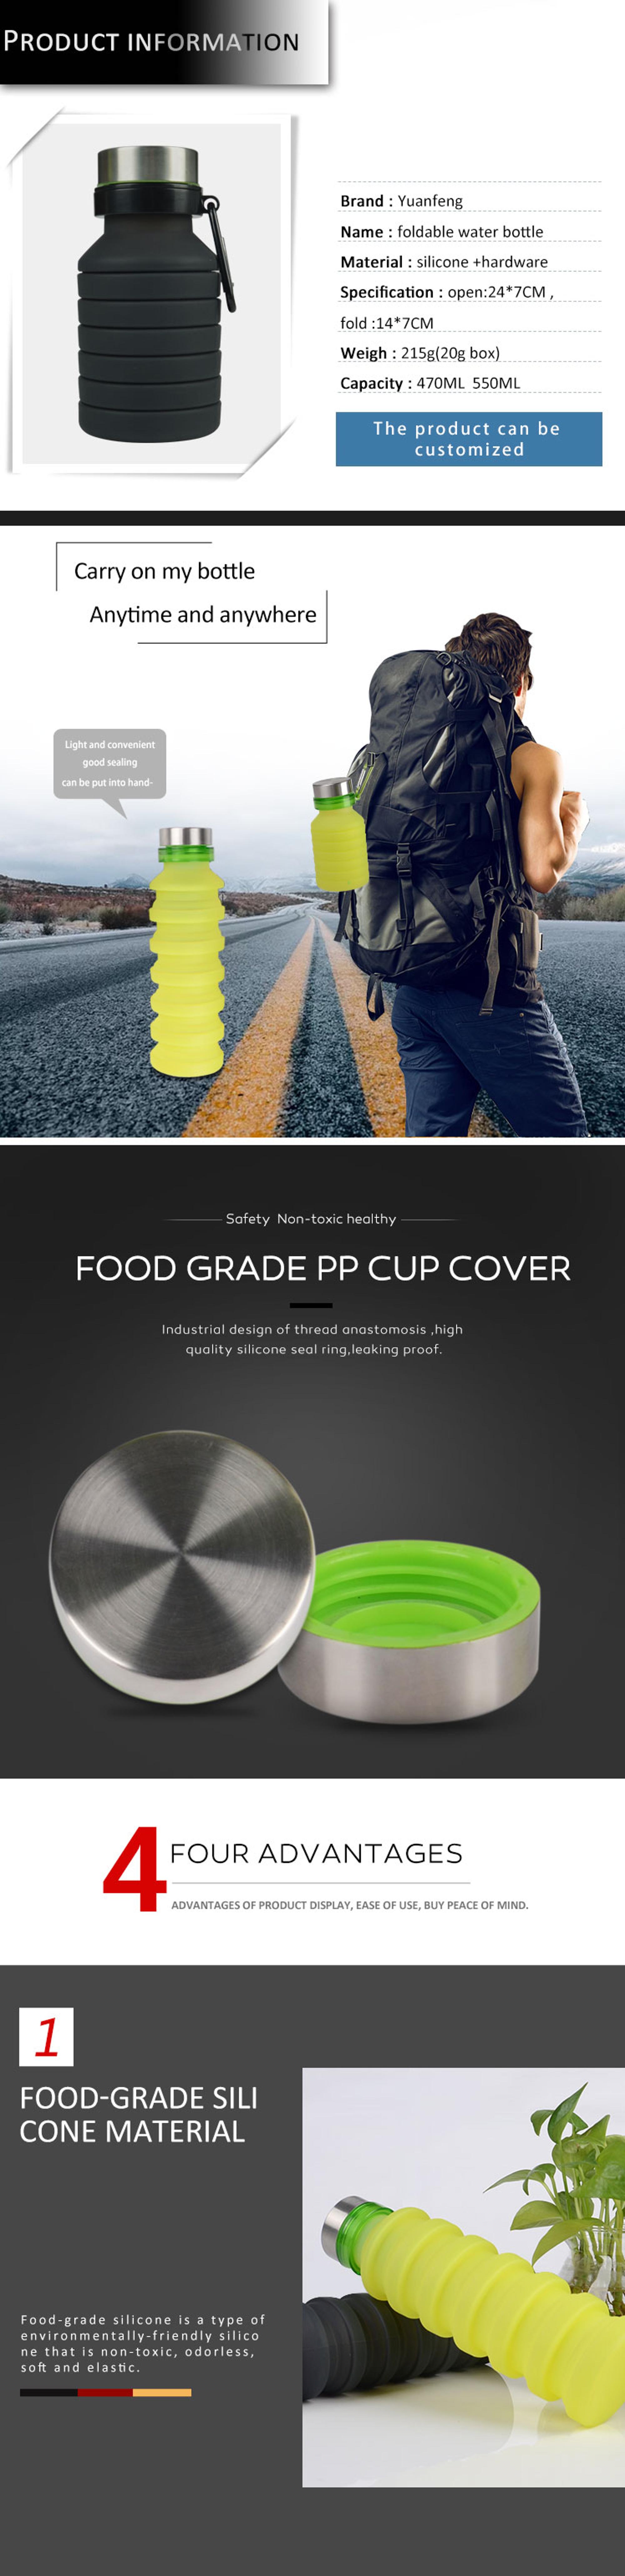 Collapsible Water Bottle 5